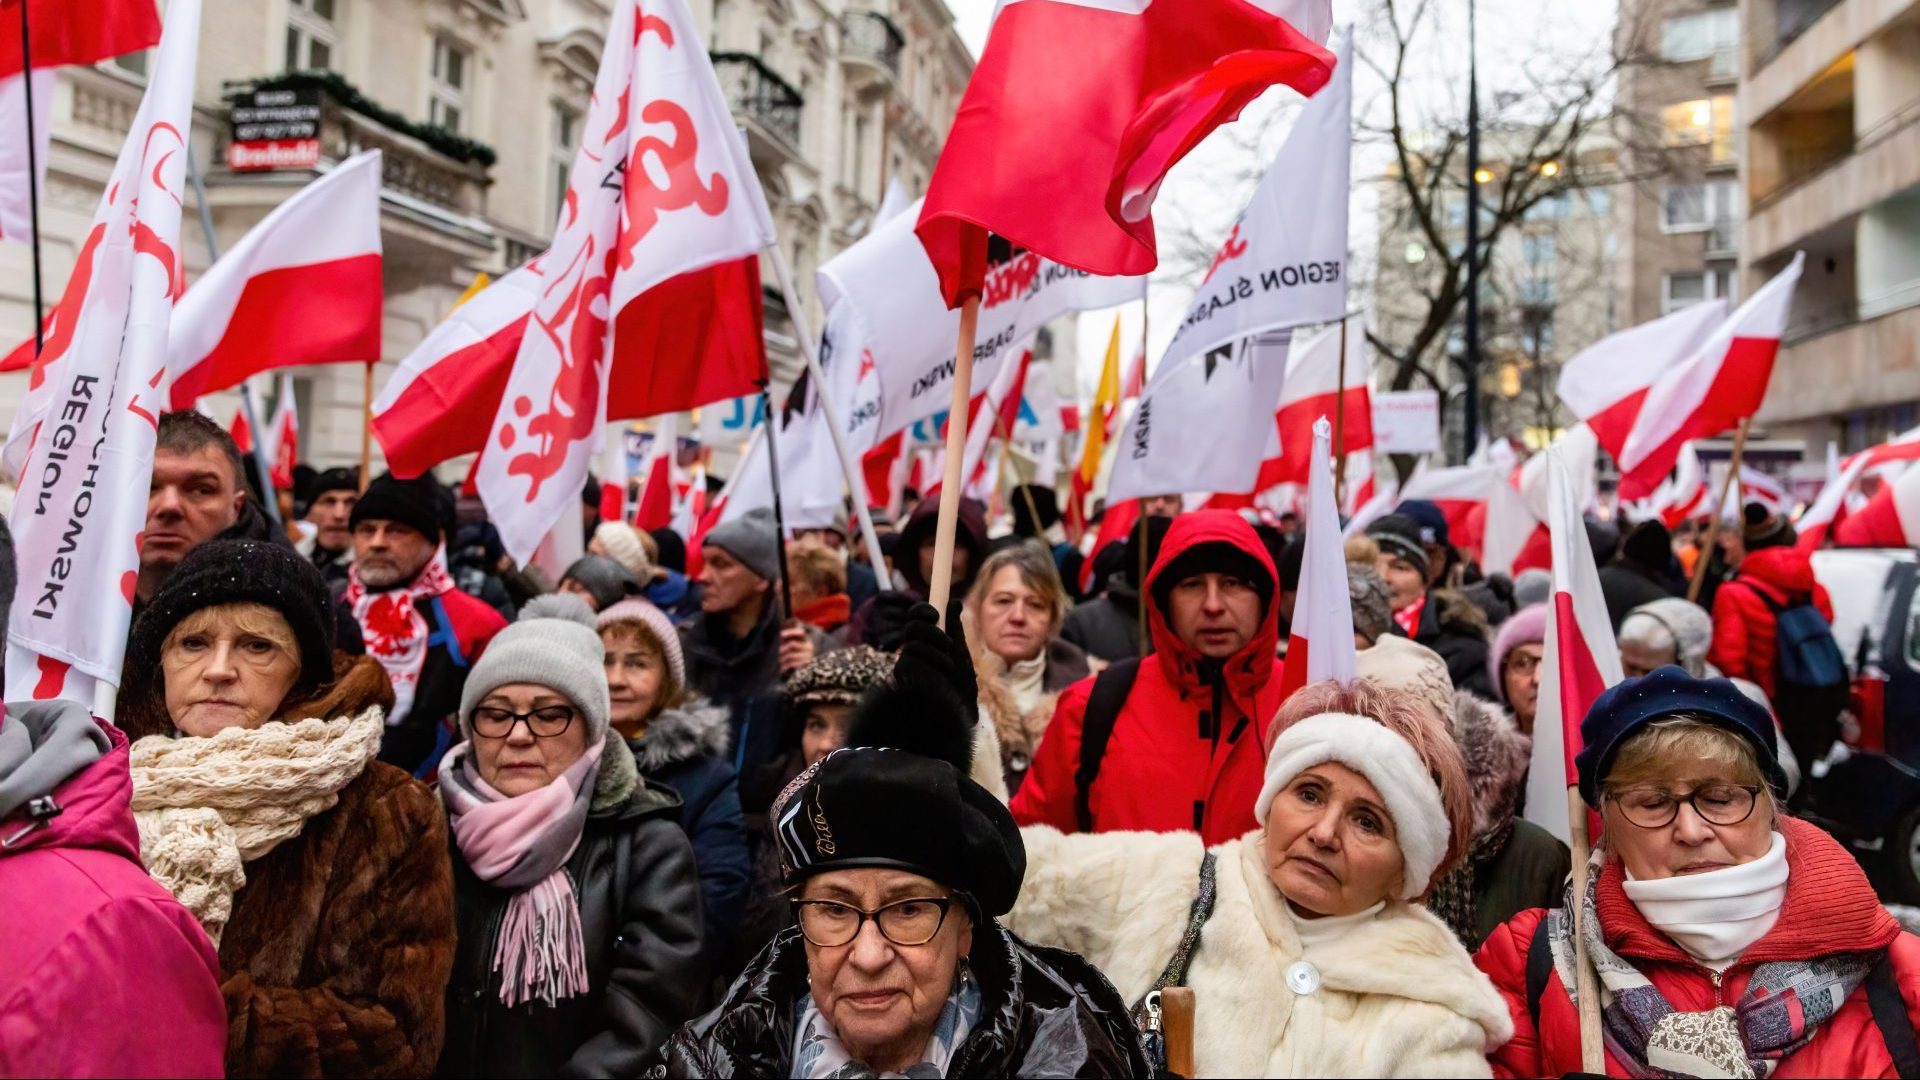 People rally in support of the recently defeated right wing PiS party 
Photo: Dominika Zarzycka/SOPA/LightRocket/Getty